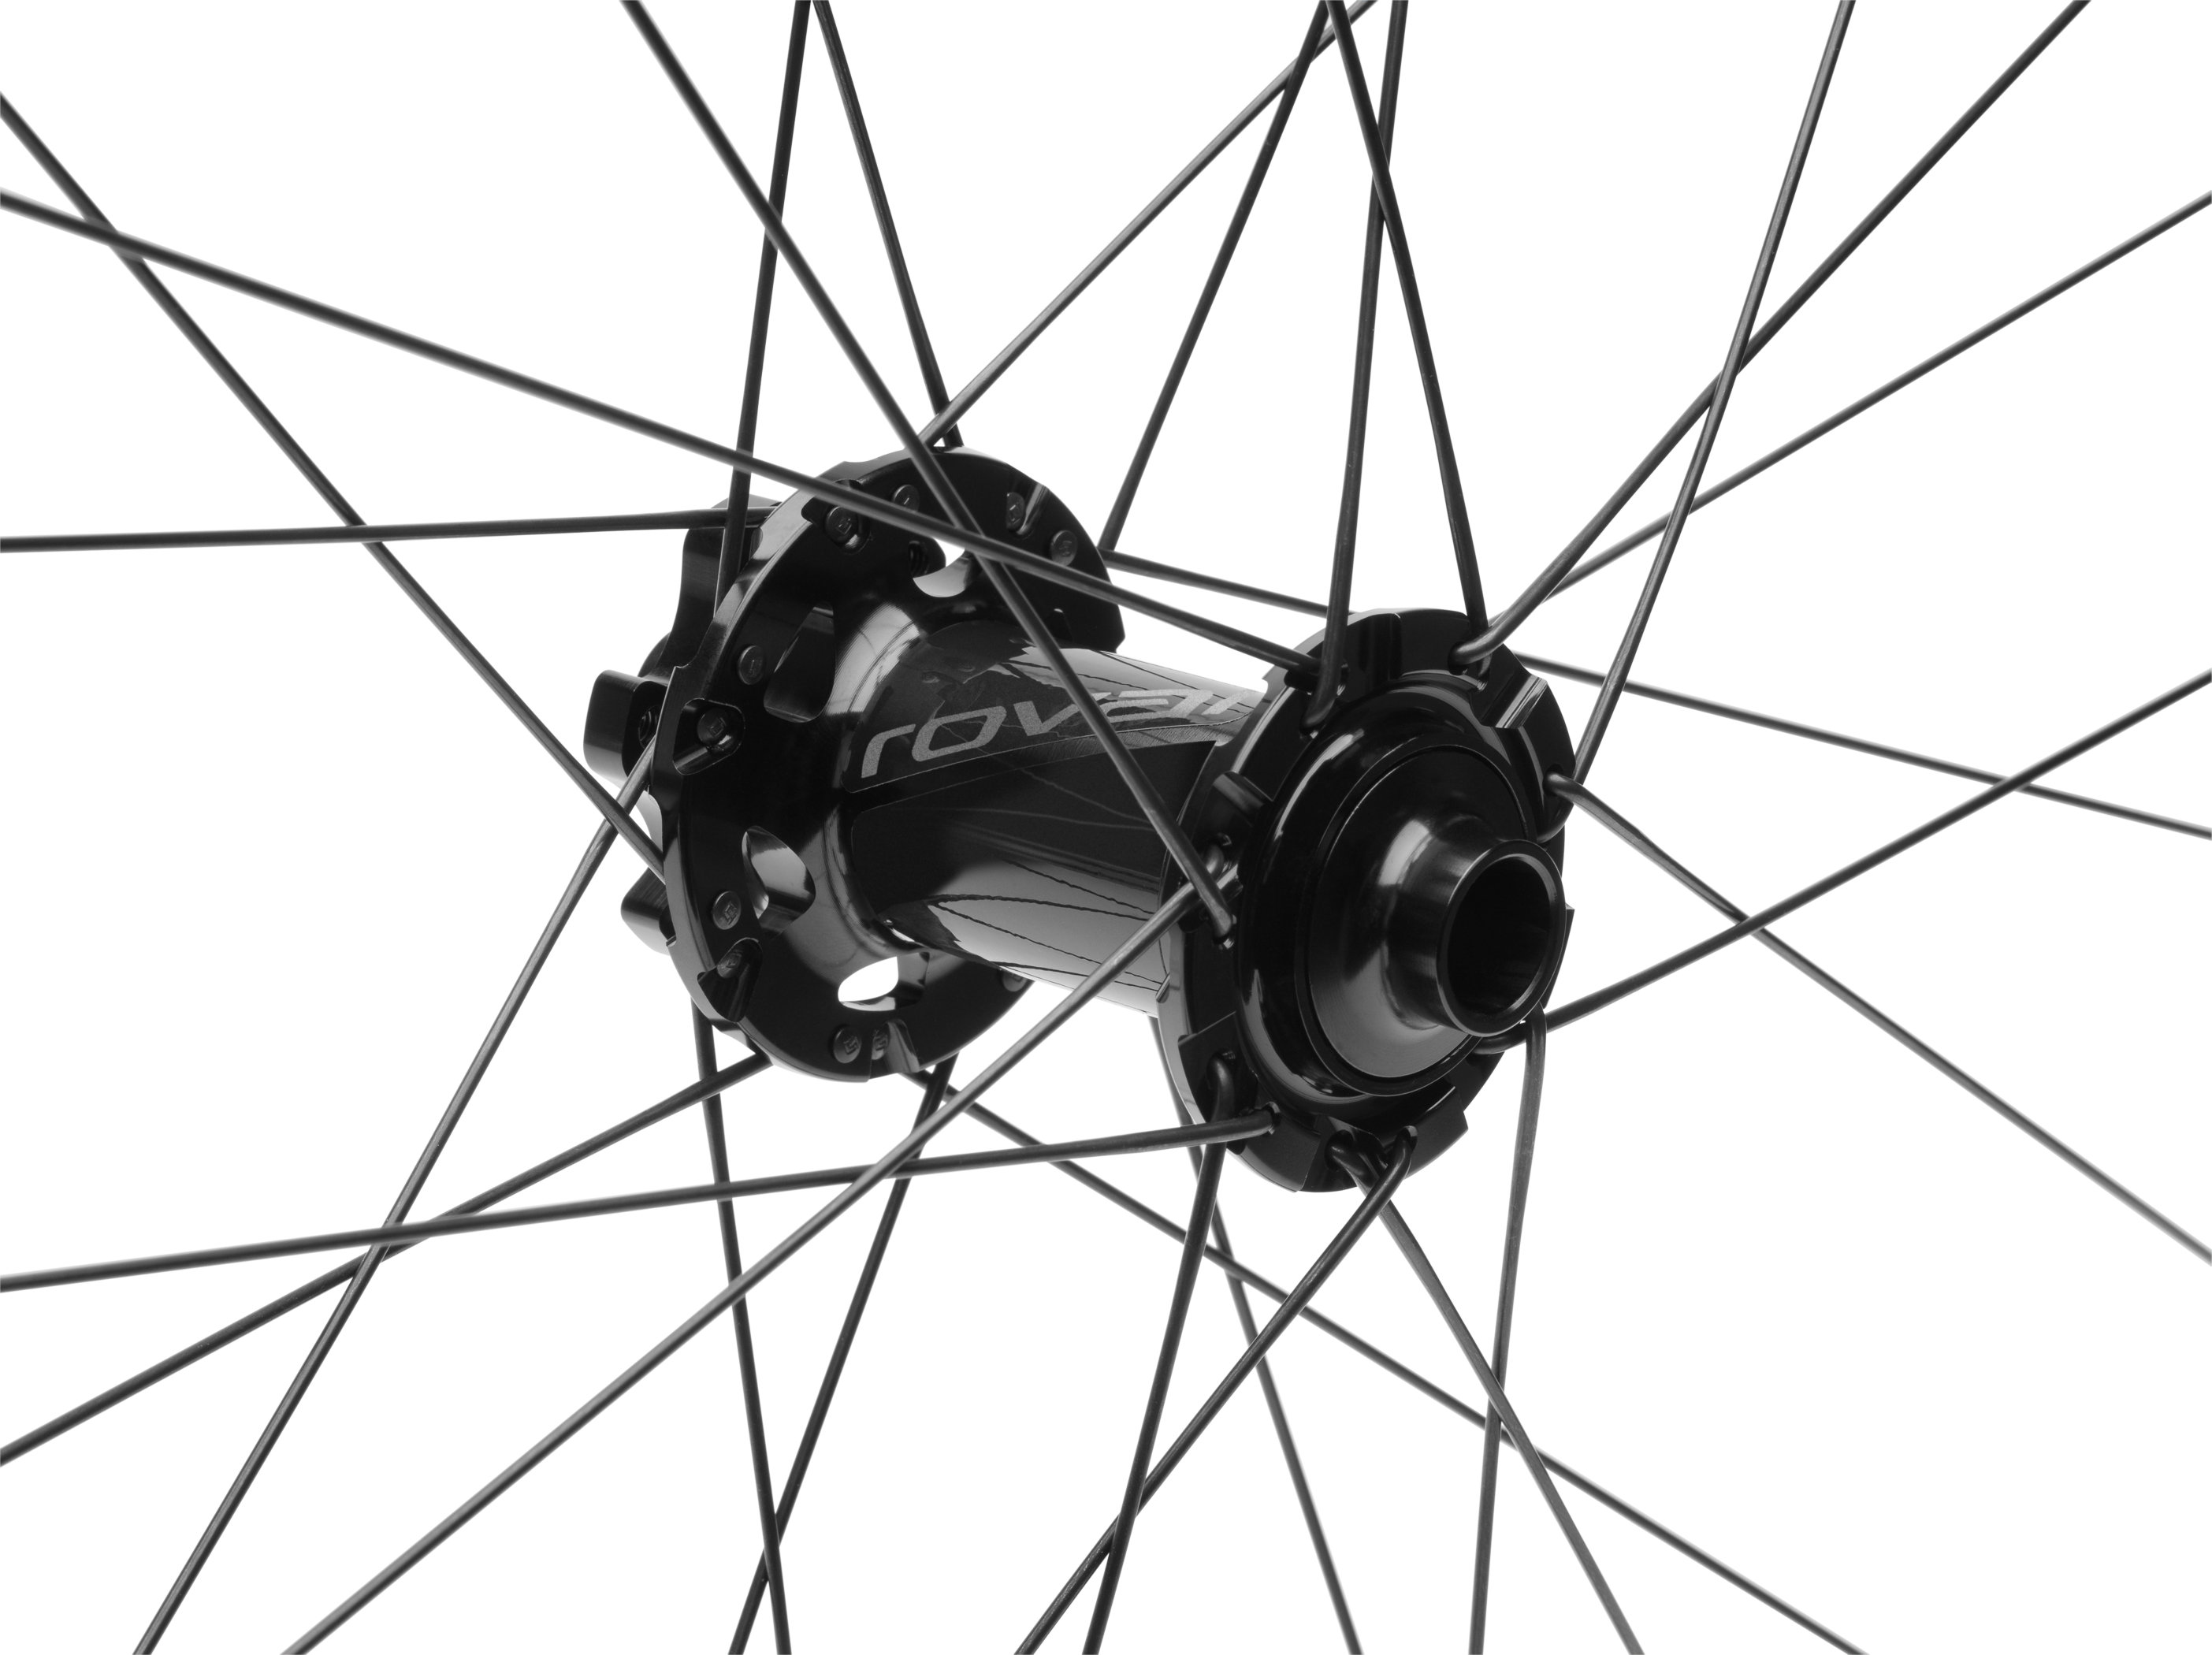 specialized front hub